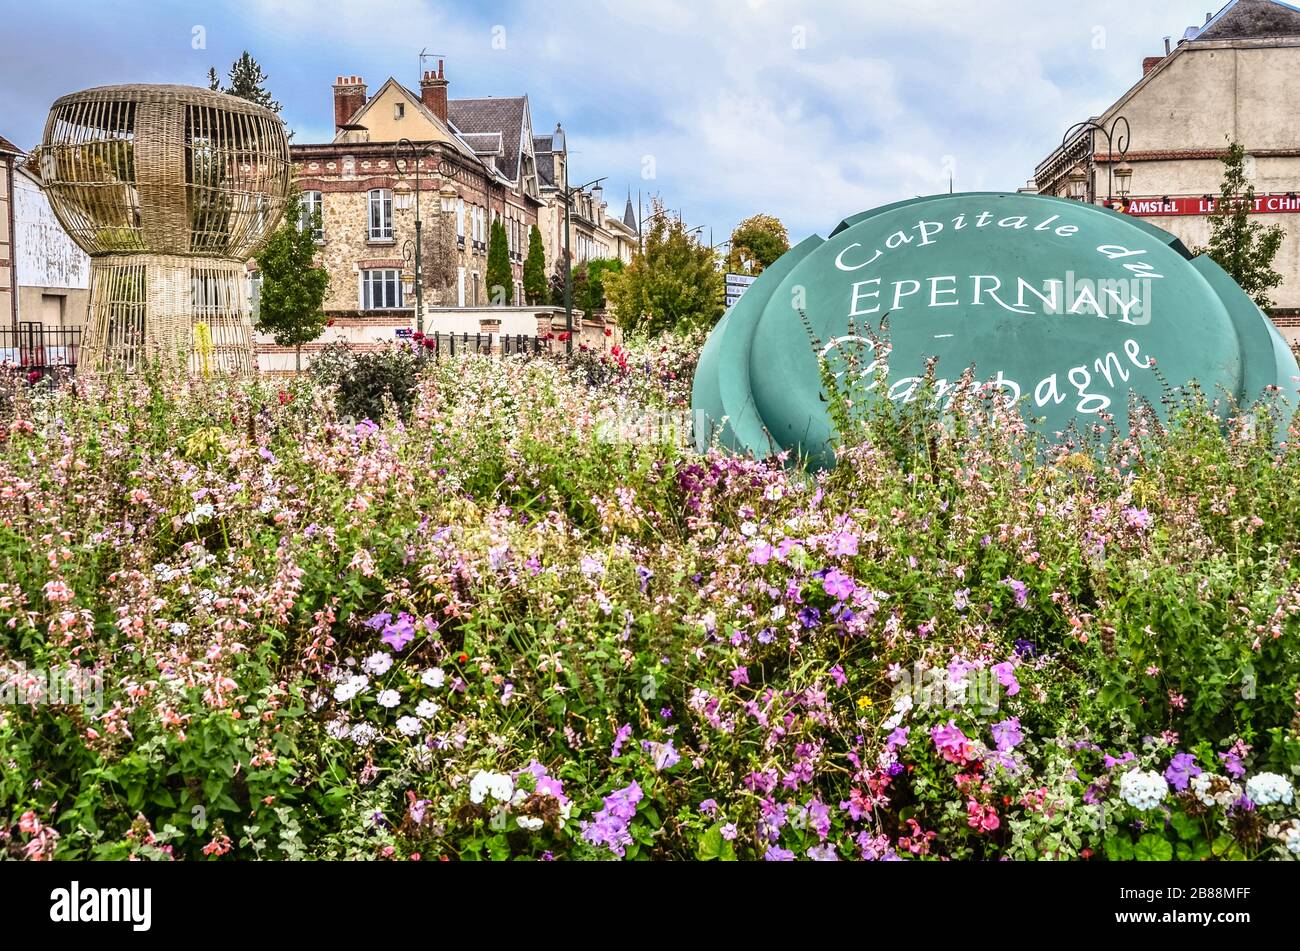 Epernay, France - The Capital of Champagne Stock Photo